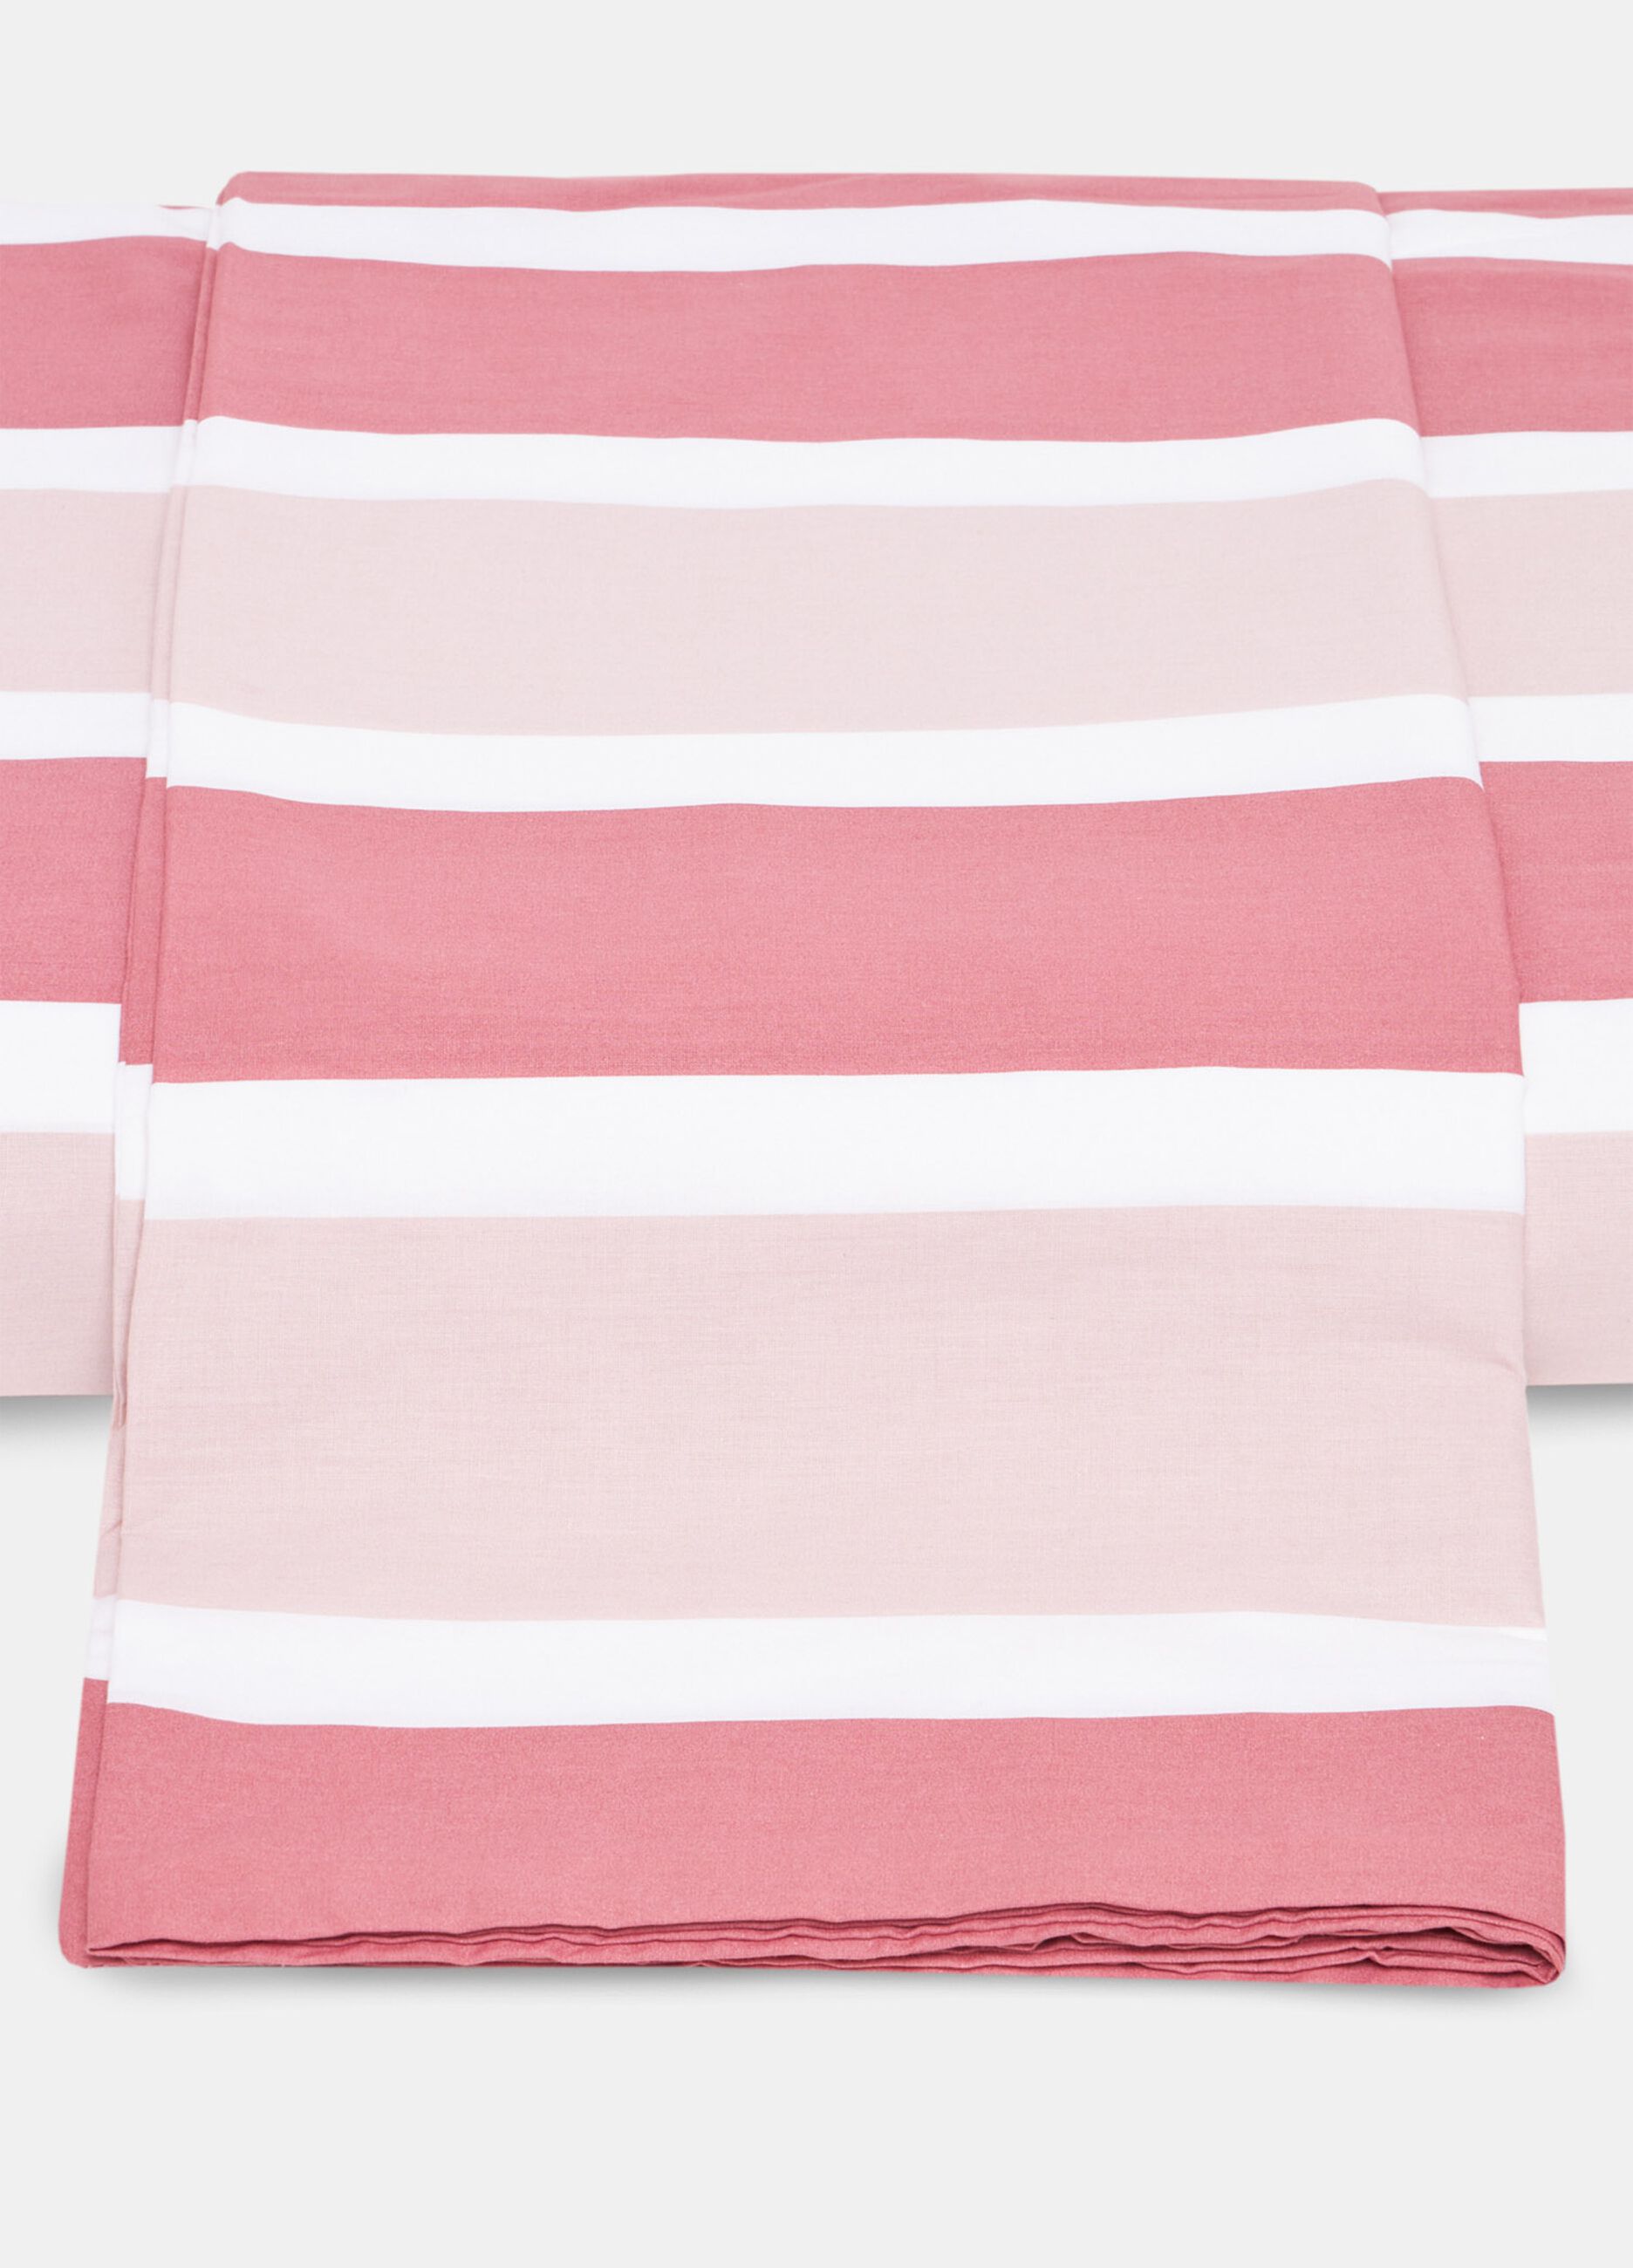 Striped double bed duvet cover in cotton